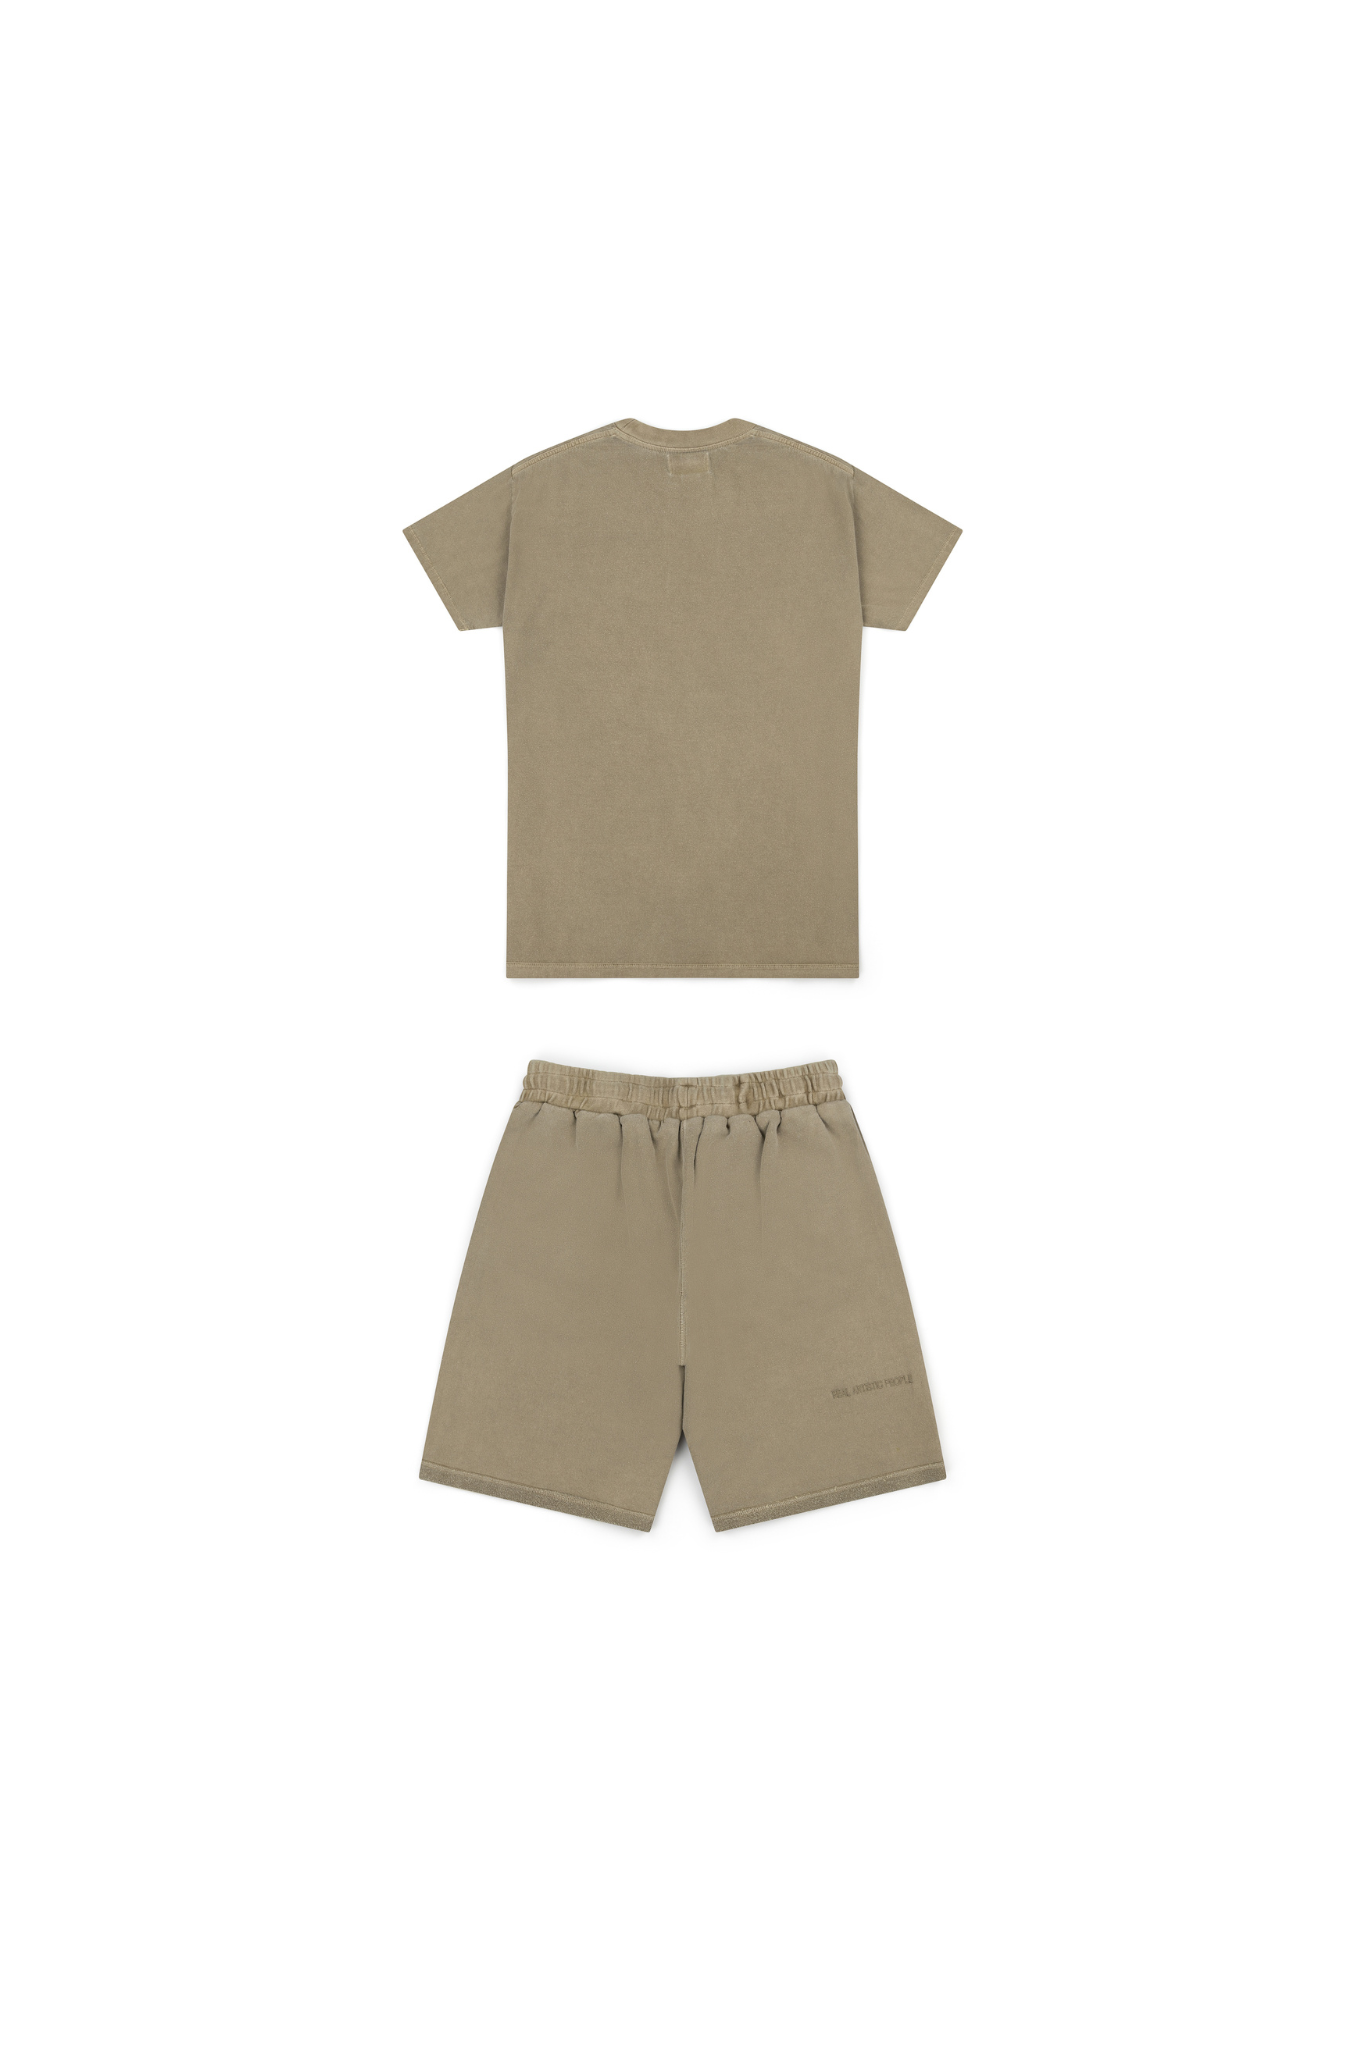 Real Artistic People - Heir Tee and Shorts Twin Set Vintage Olive